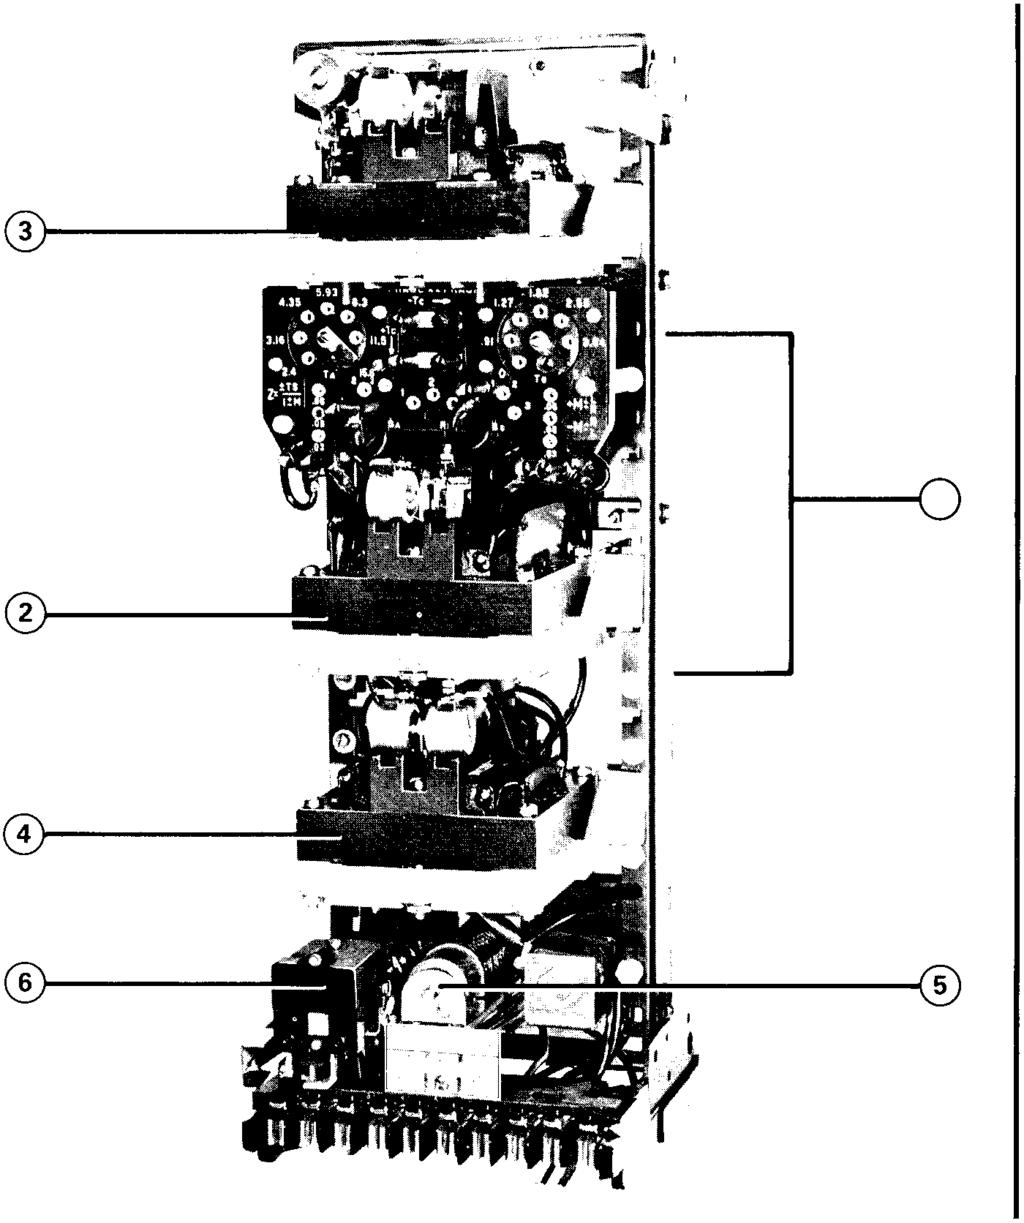 The primary winding of the shortreach compensator Tc also has seven taps which terminate at this tap block.